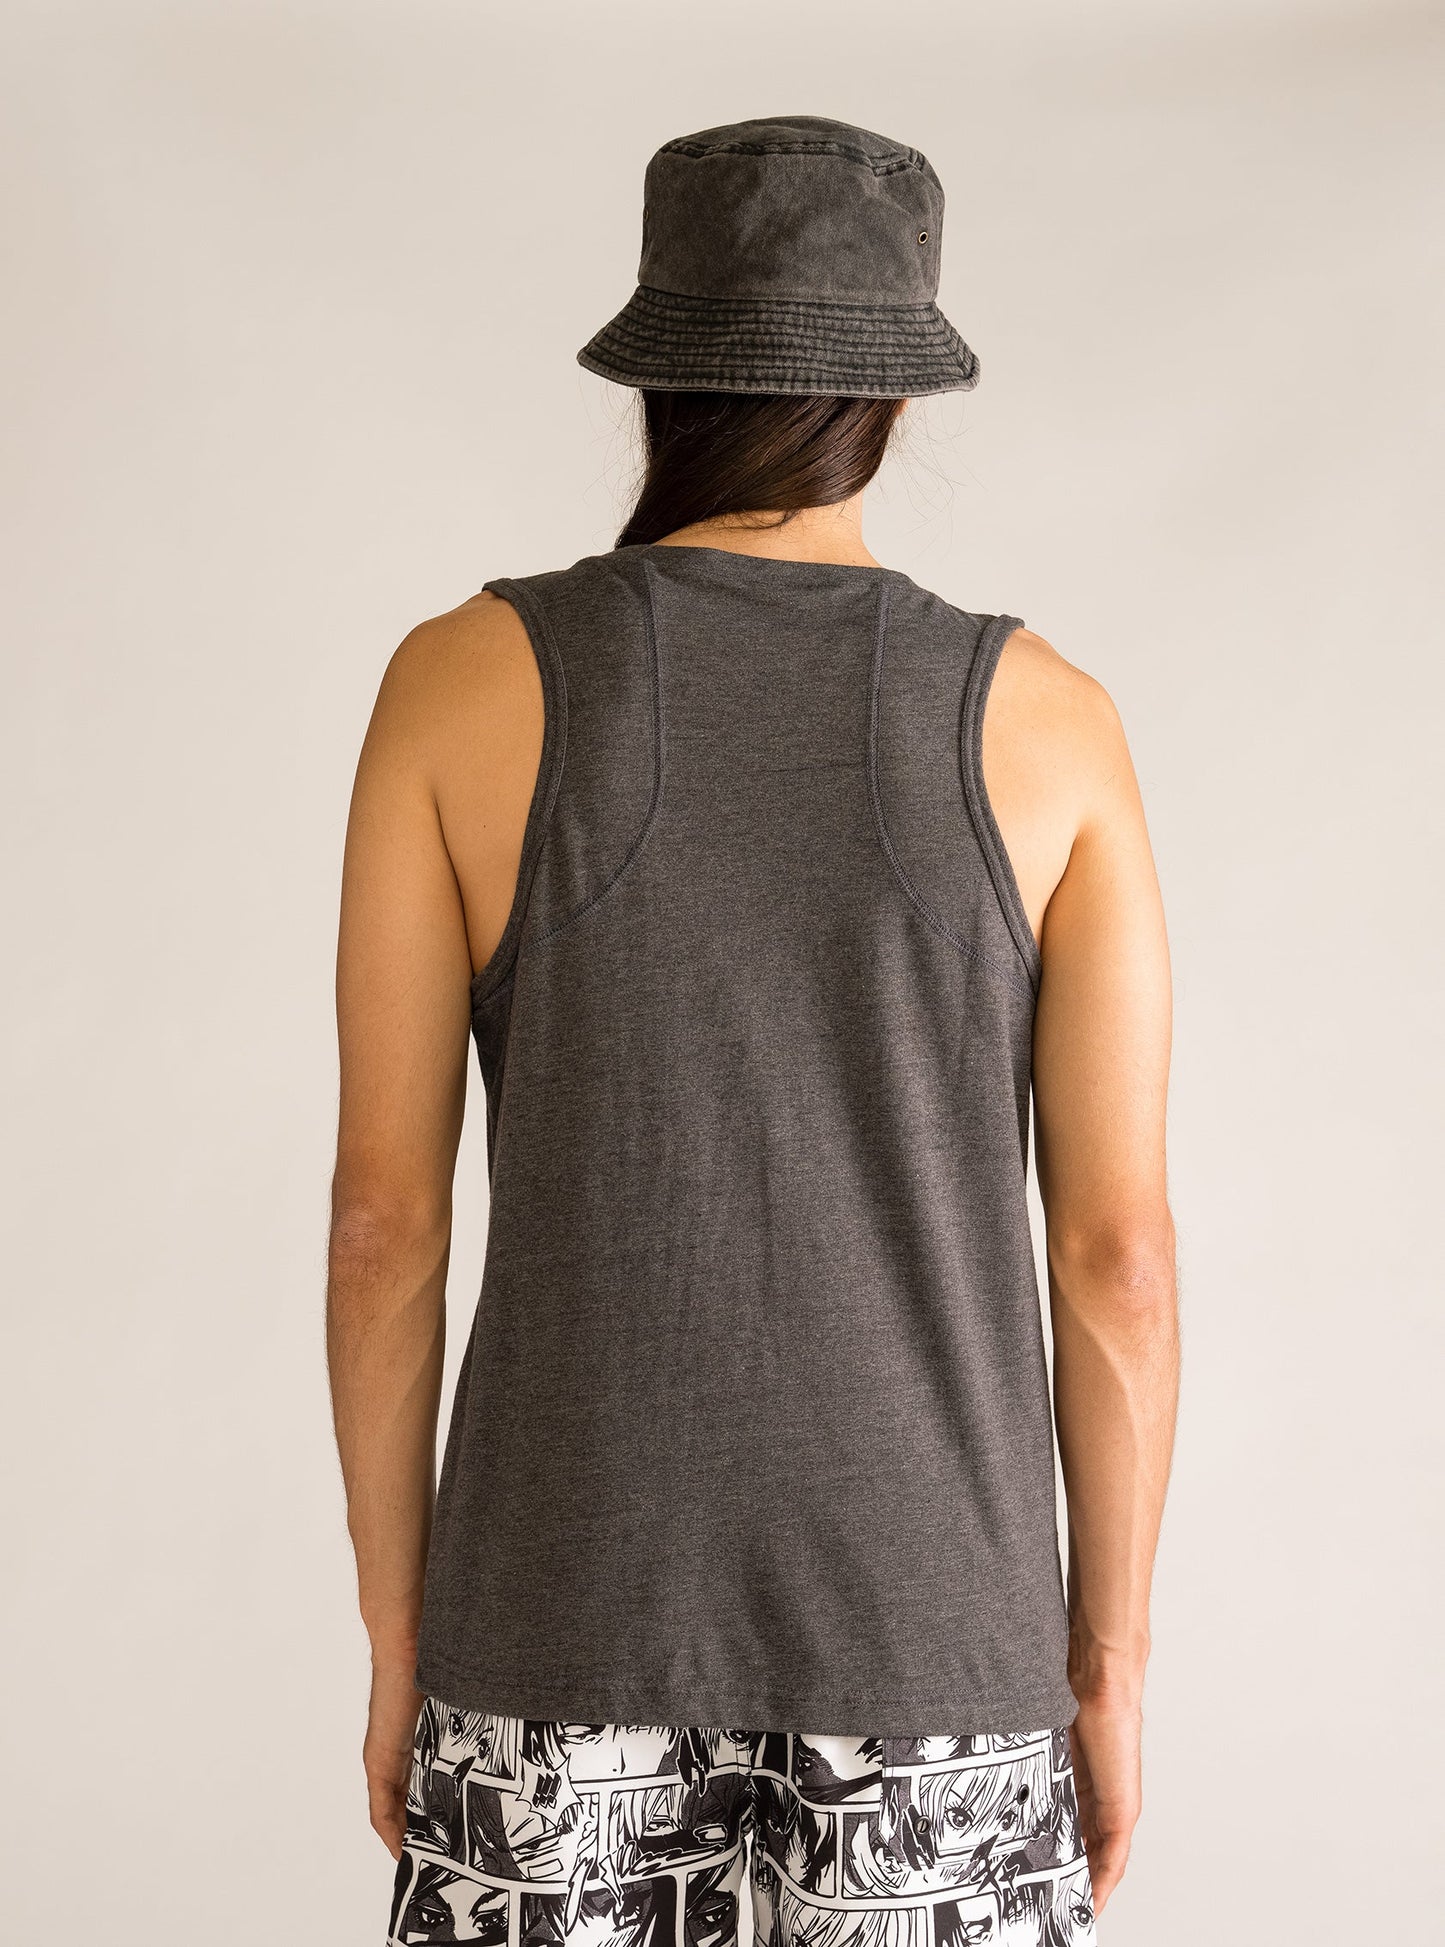 Summer Tank Top, Gris Obscuro